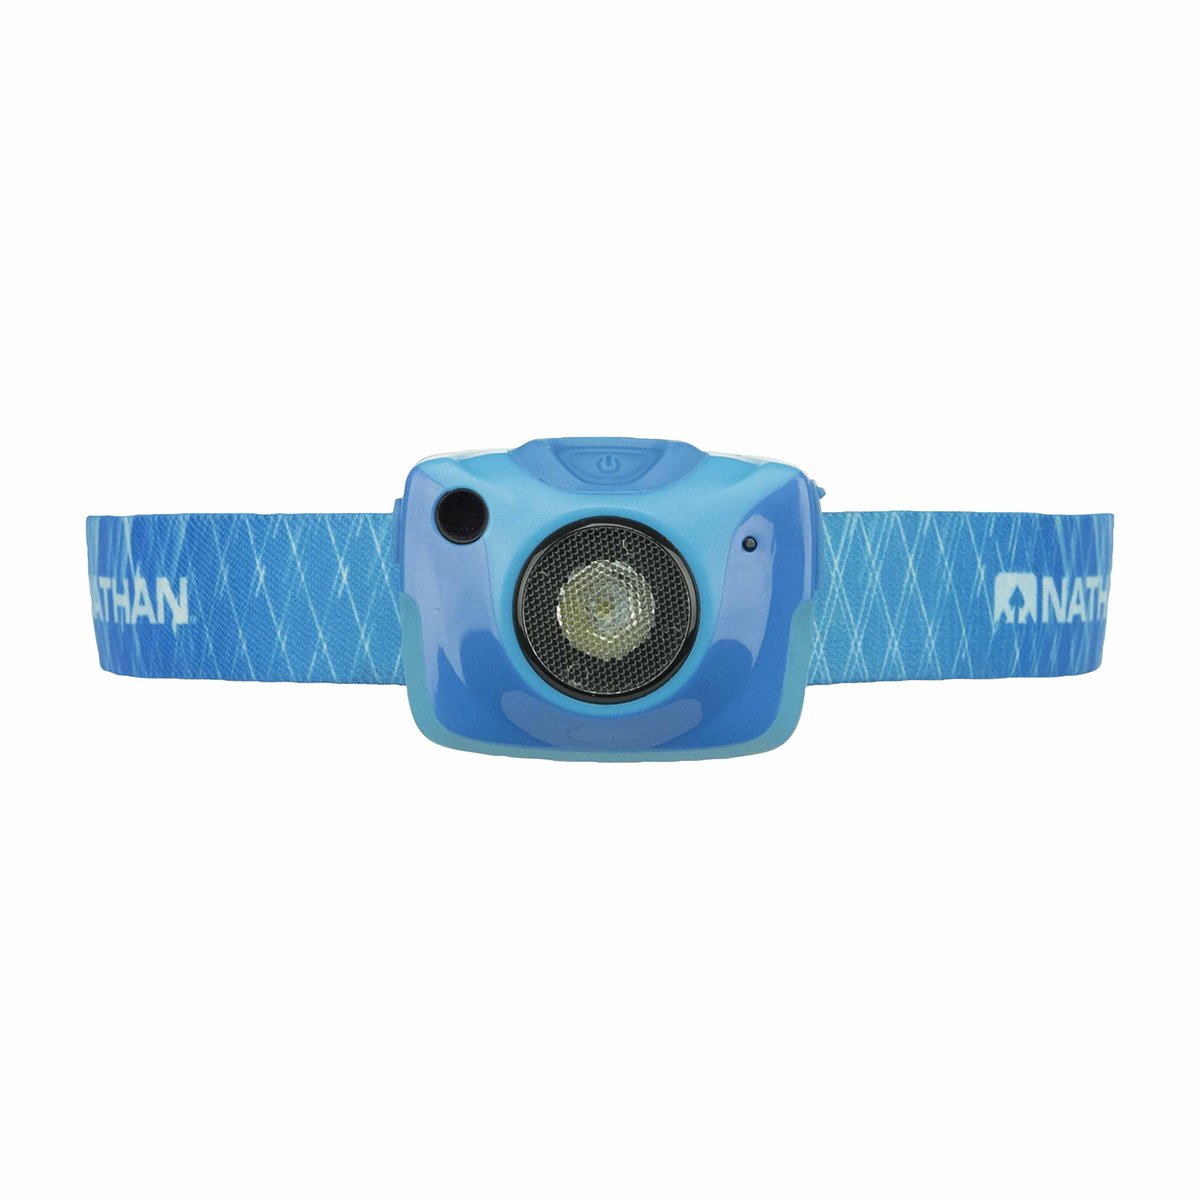 Nathan Nebula Fire Runner's Headlamp, , large image number null